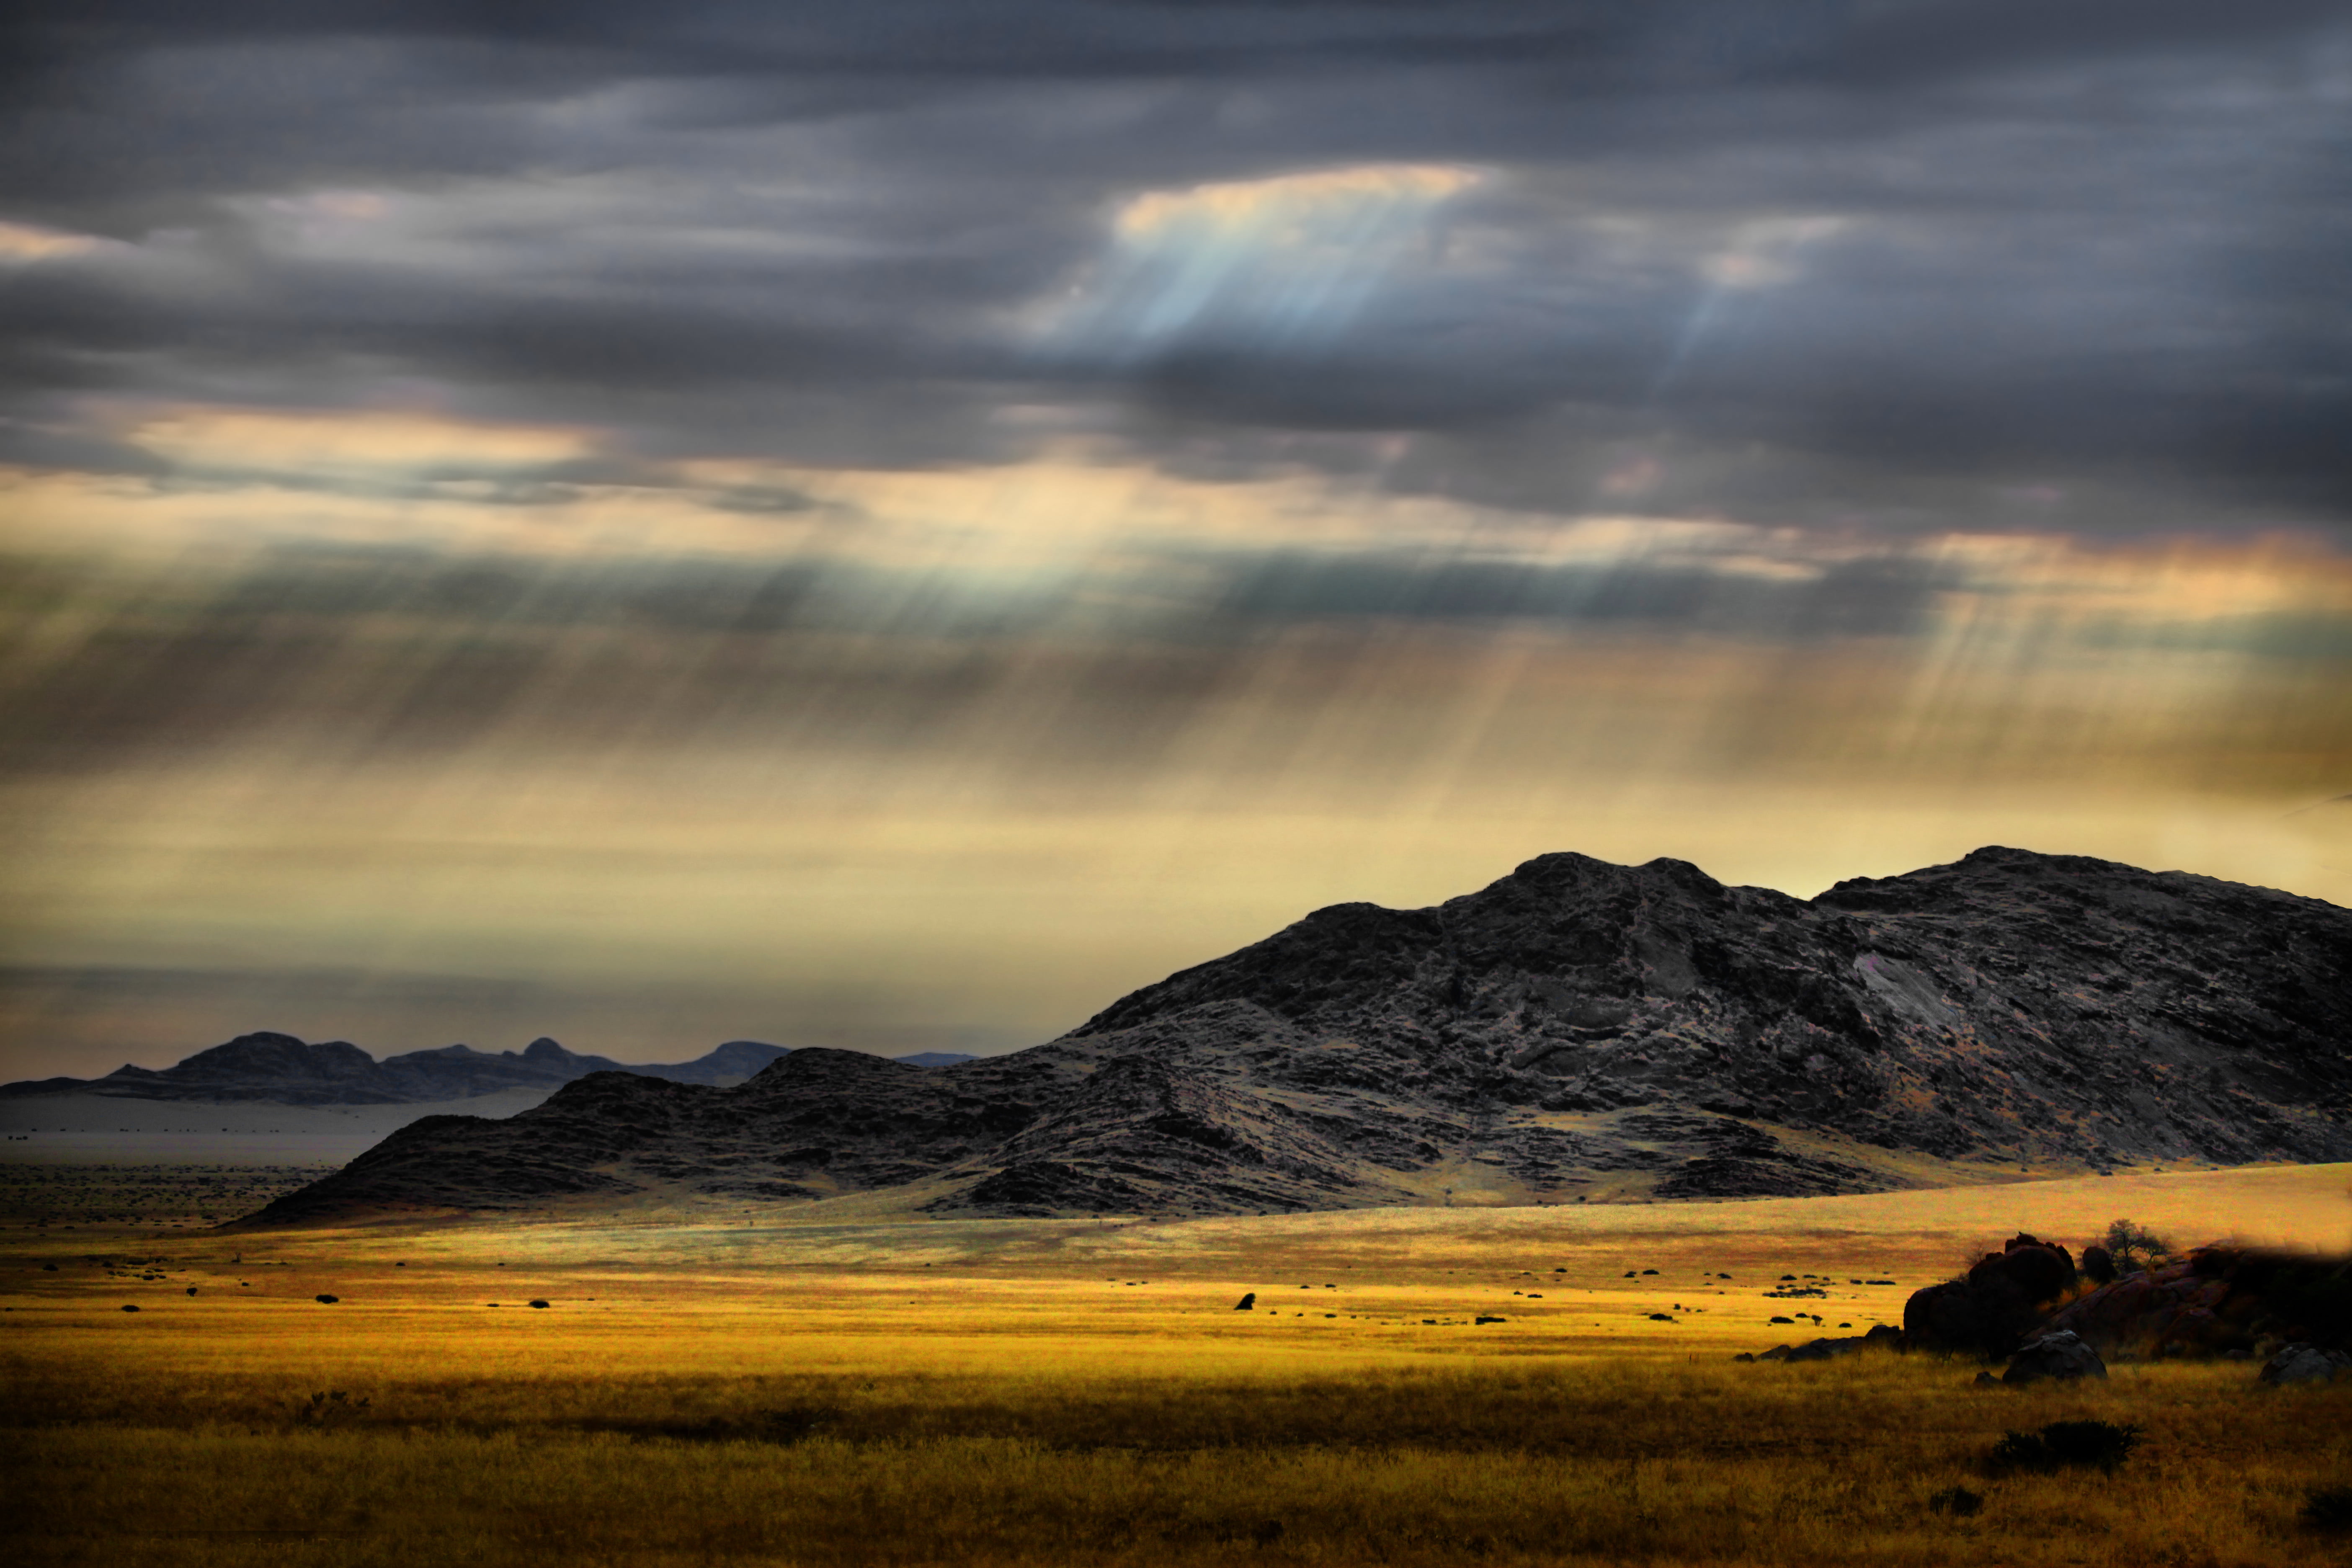 grass field with rays of light, Hope, Namibia, Africa, Clouds